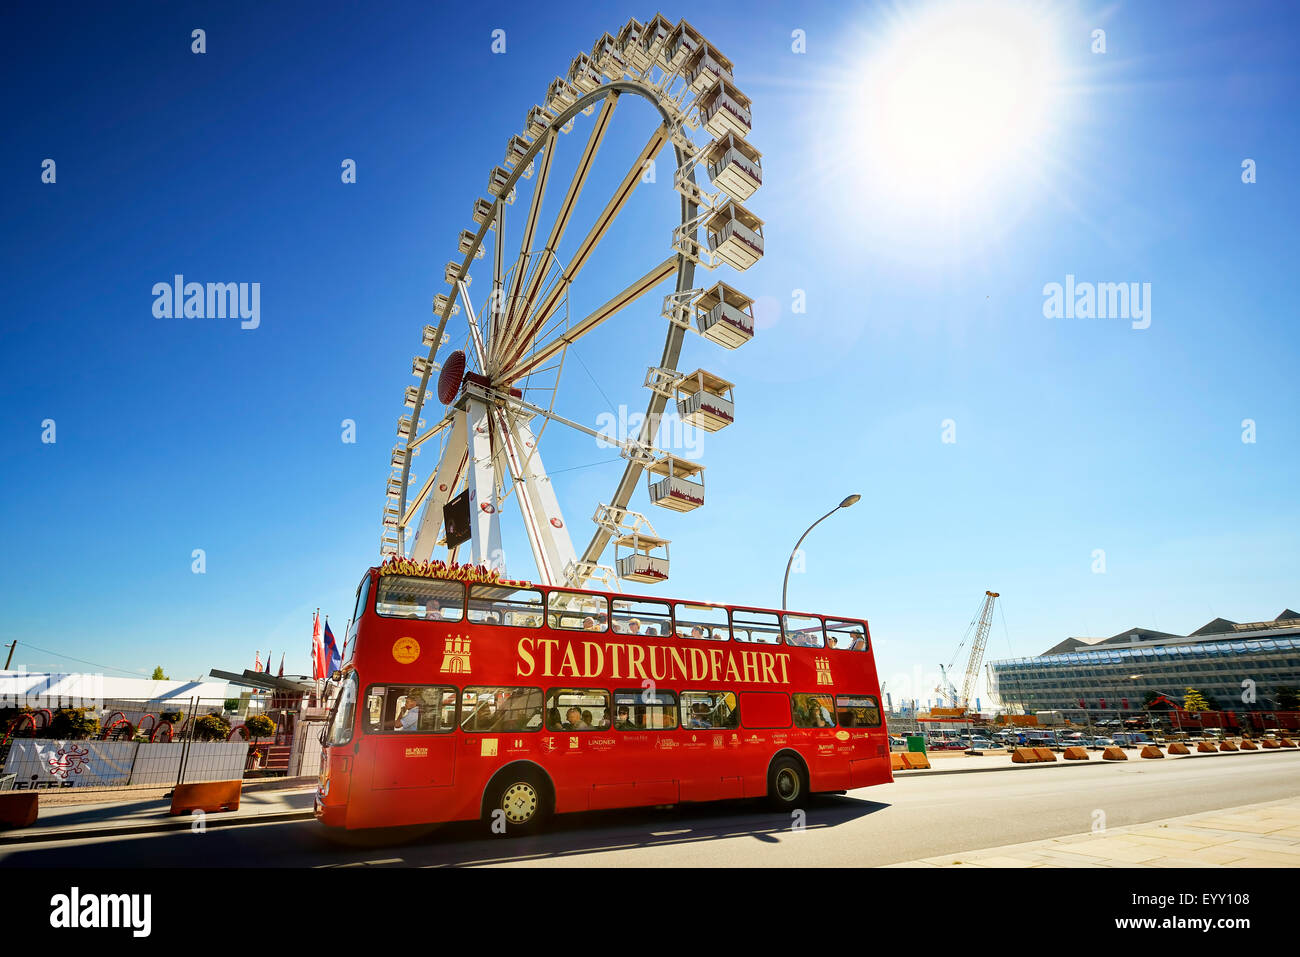 Bus for city tours and ferris wheel at the cruise terminal, Hamburg, Germany Stock Photo